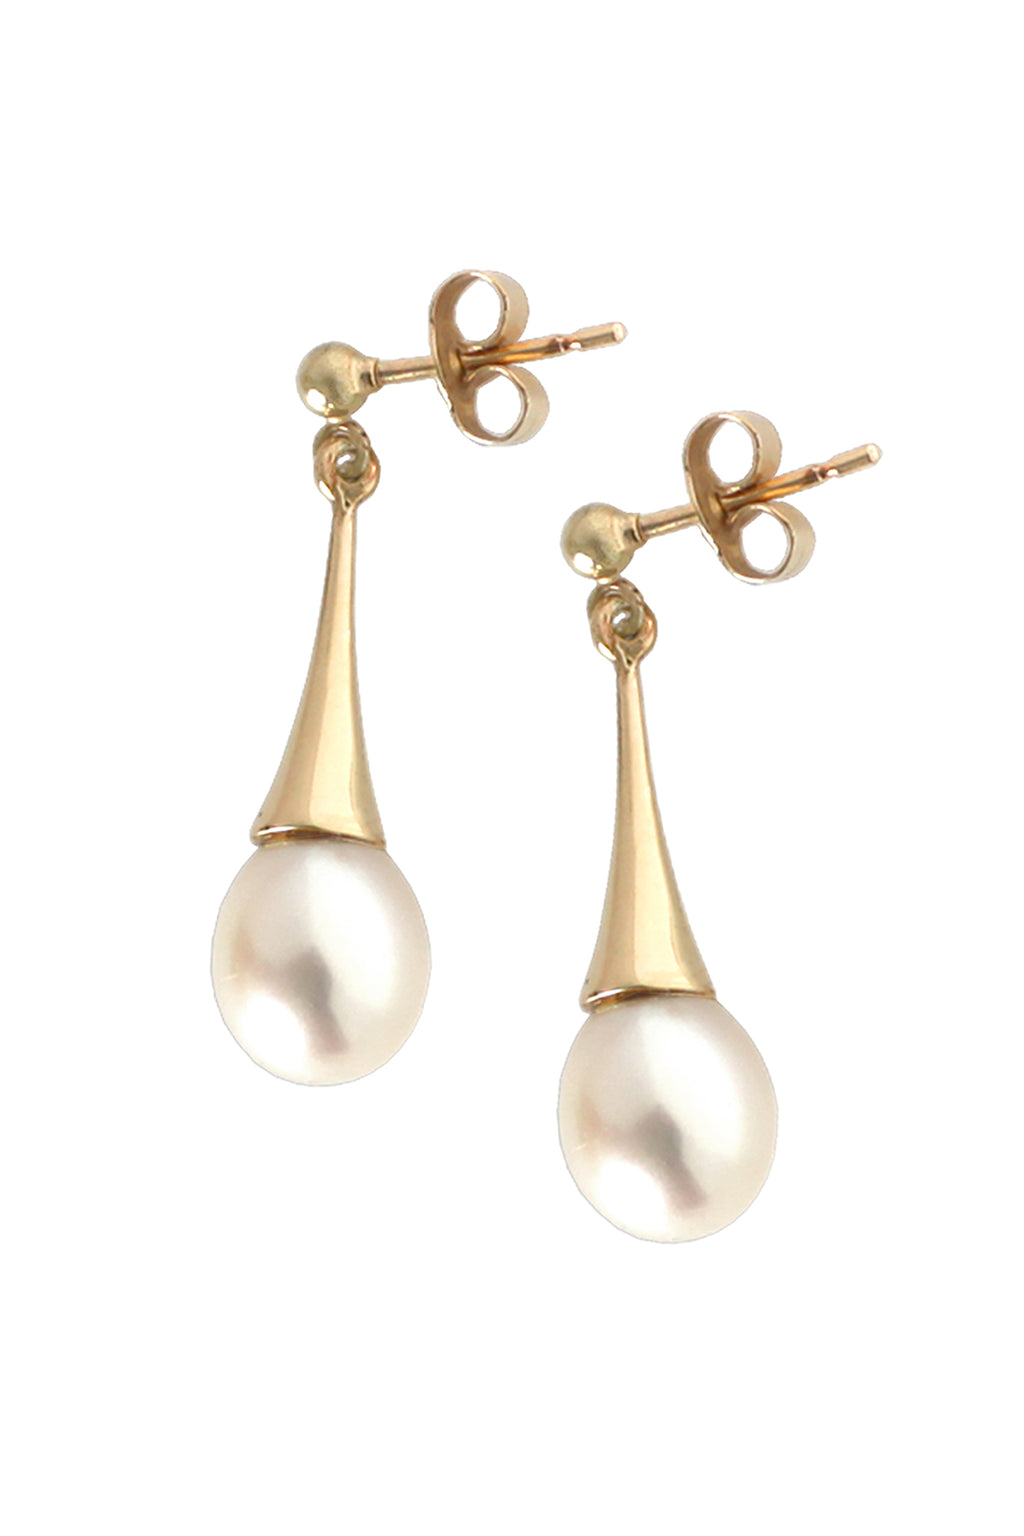 9ct Gold Earring FW Pearl Drops